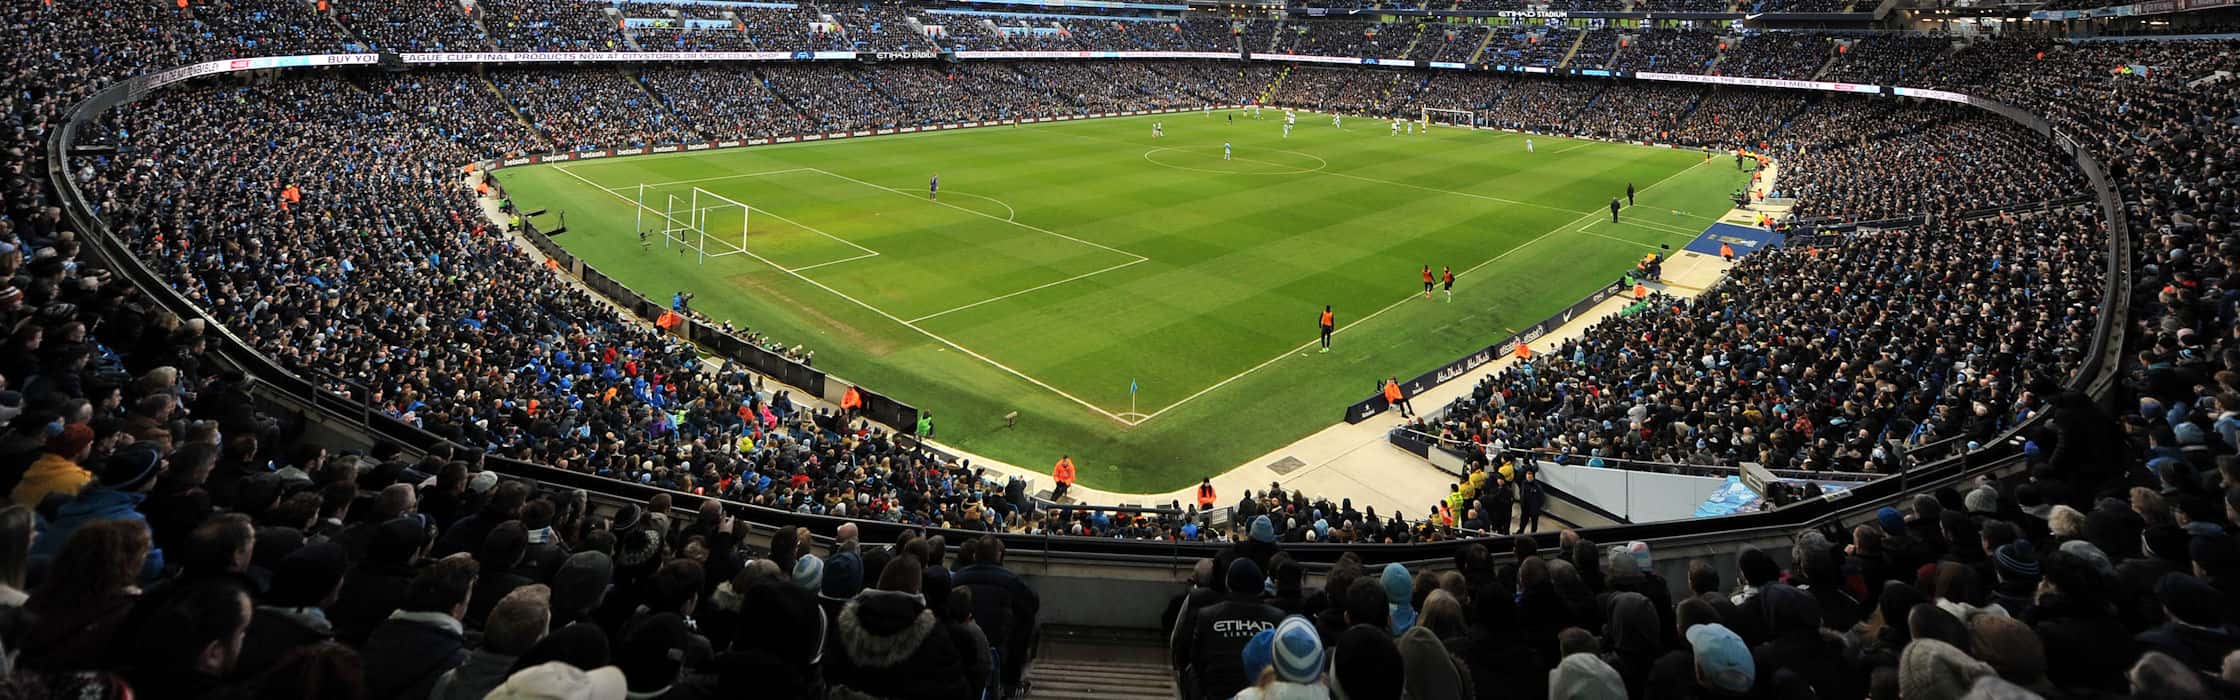 What's On at The Etihad Stadium, Manchester